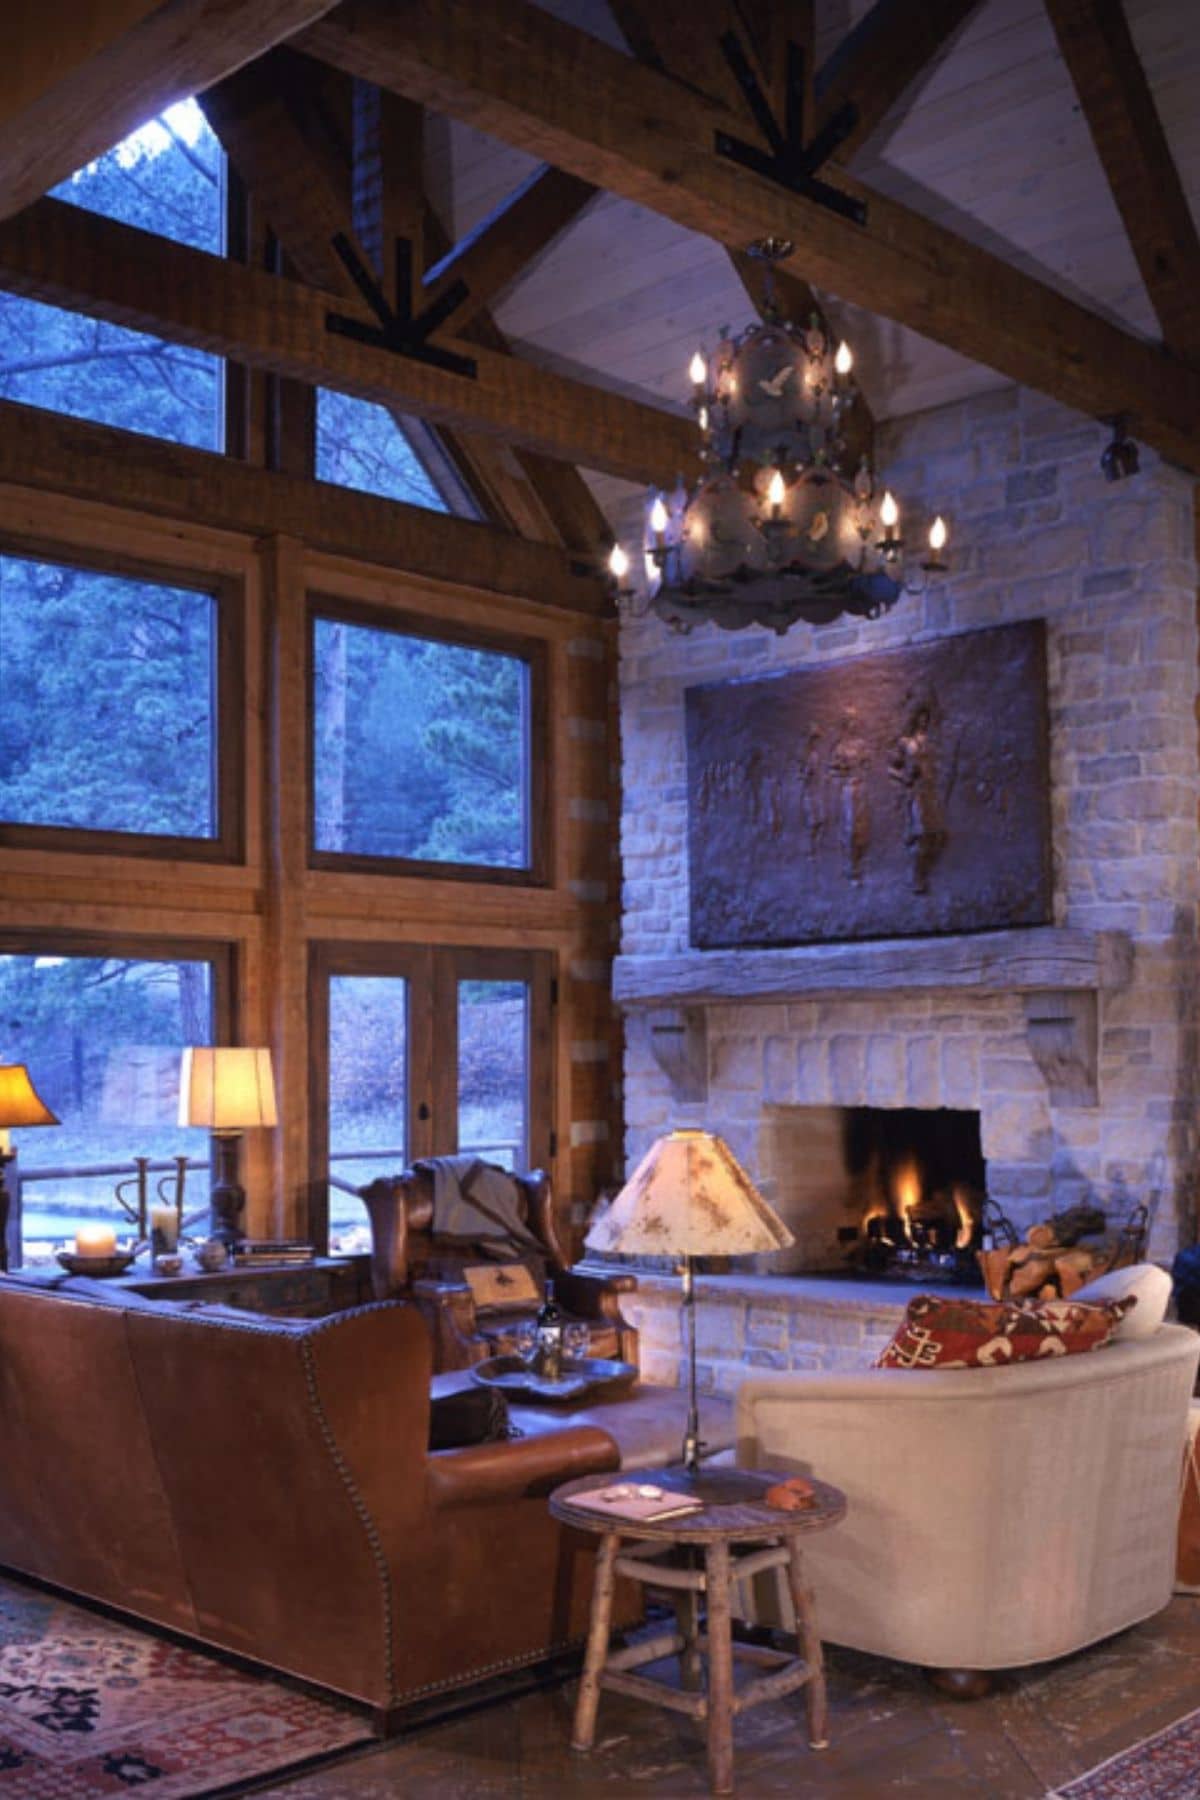 sofas by great room windows inside log cabin